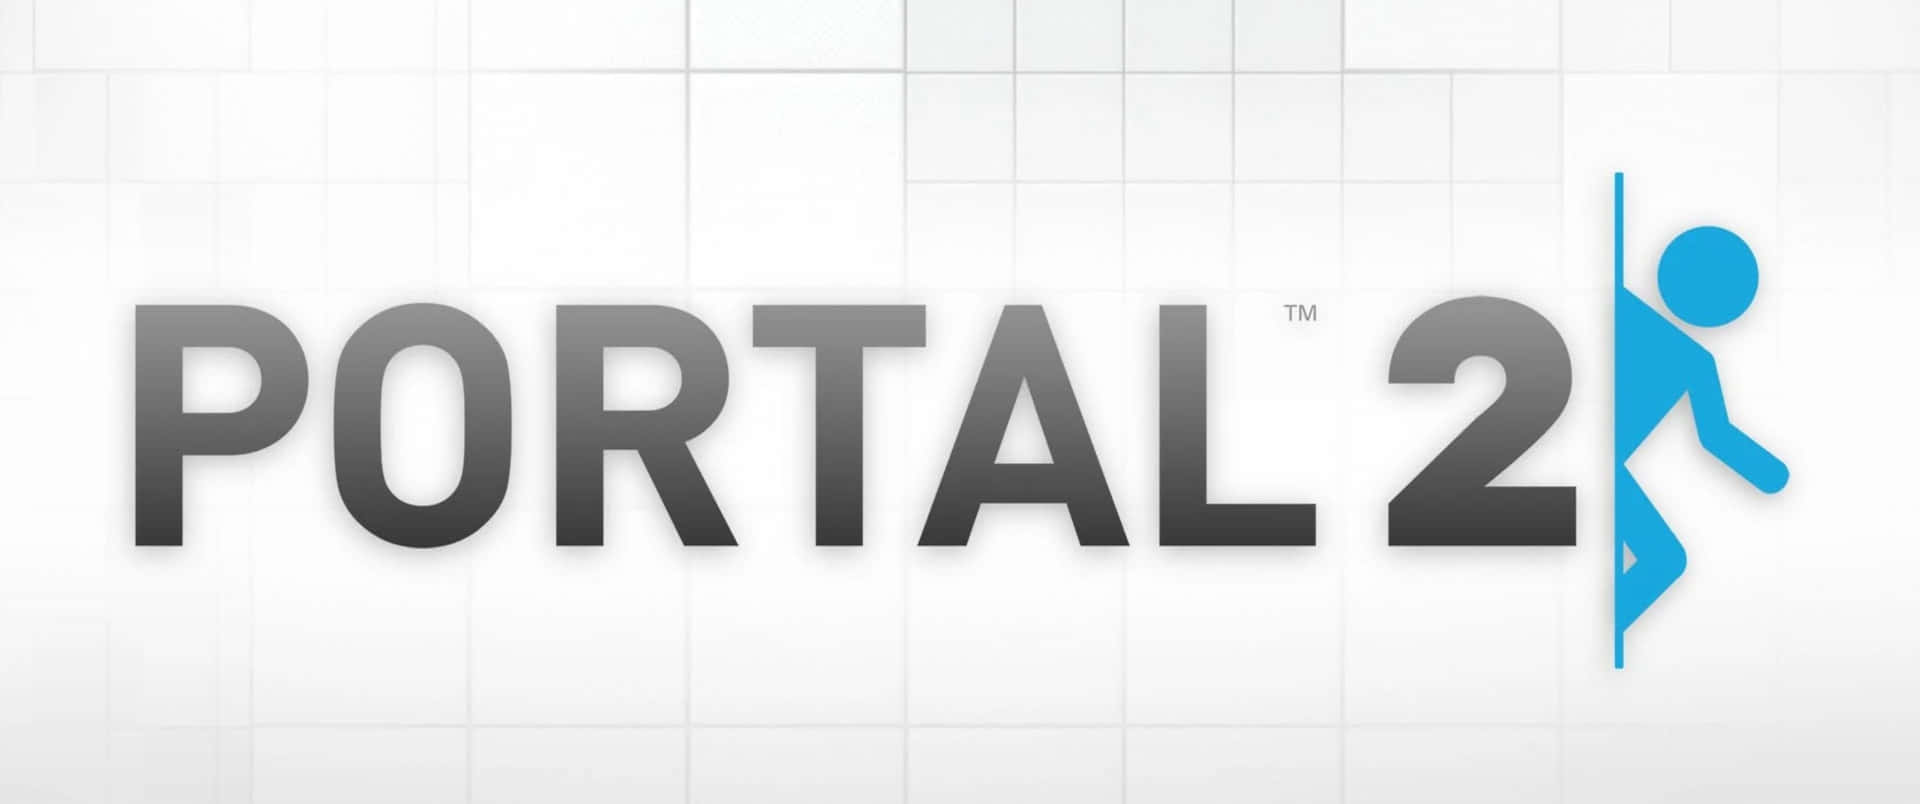 Portal 2 in All its Glory